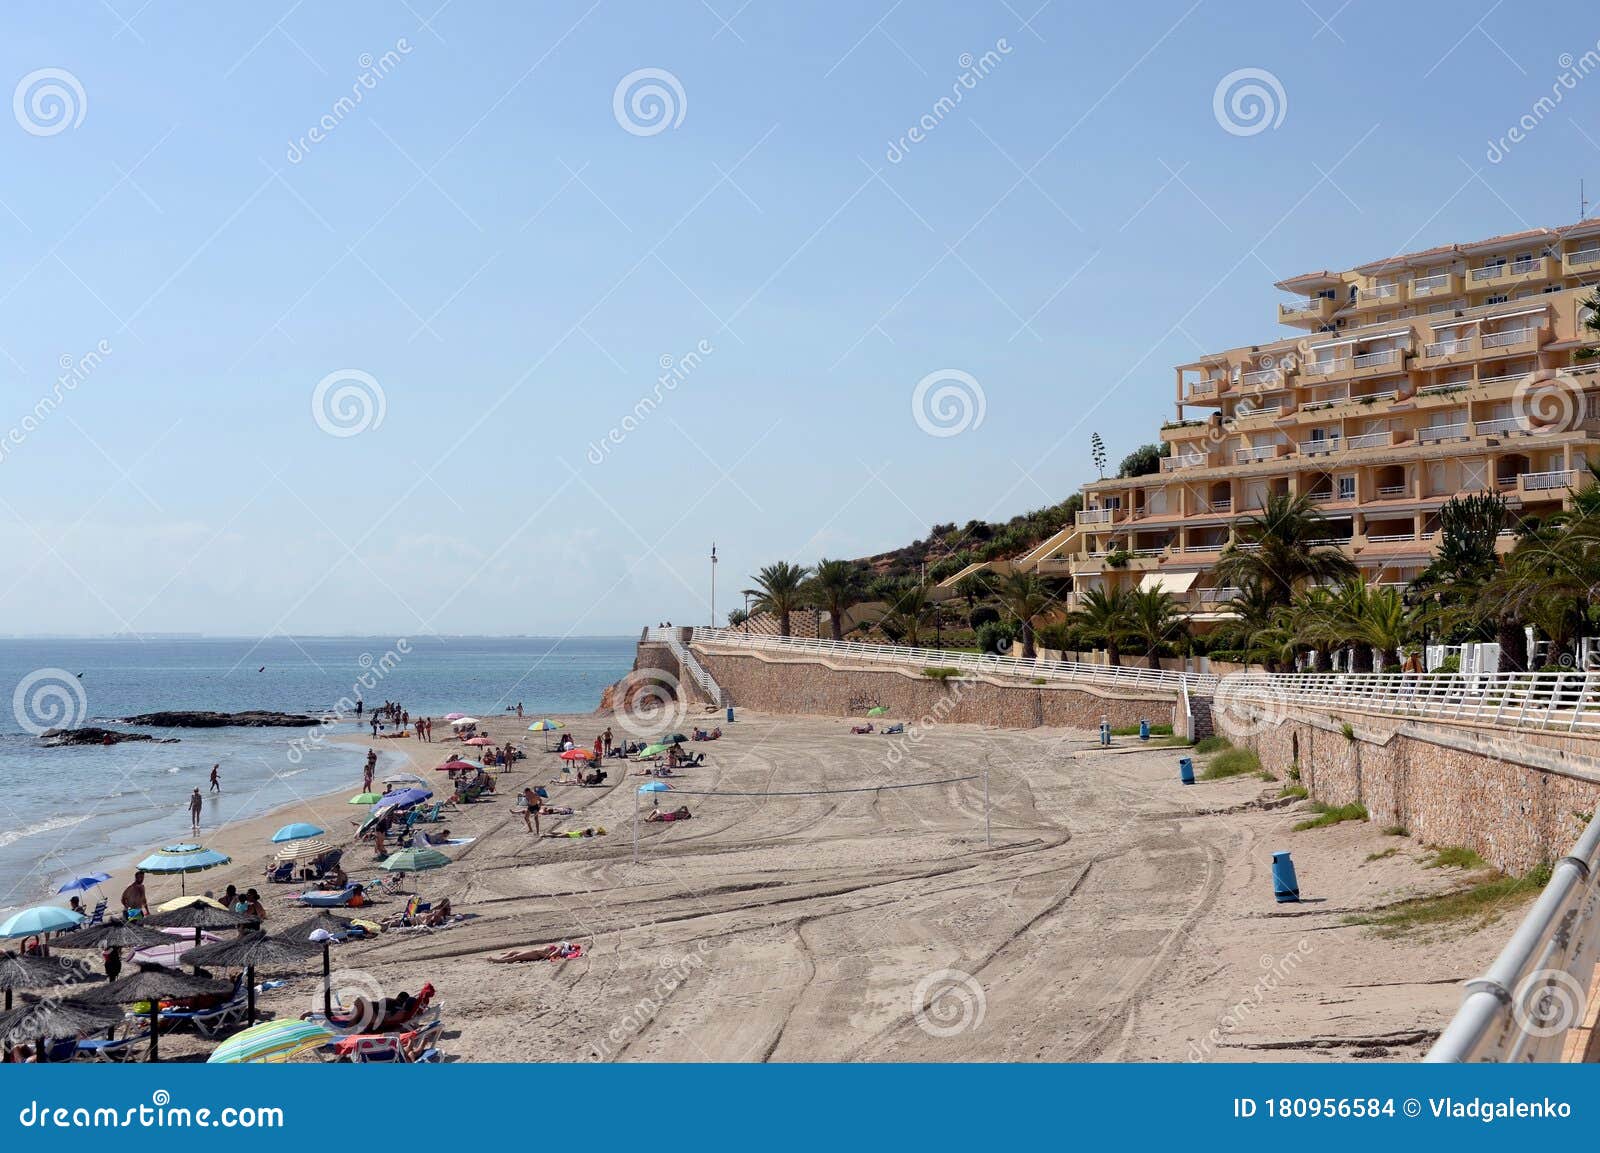 people relax on the sandy beach of playa de aguamarina, province of alicante, spain